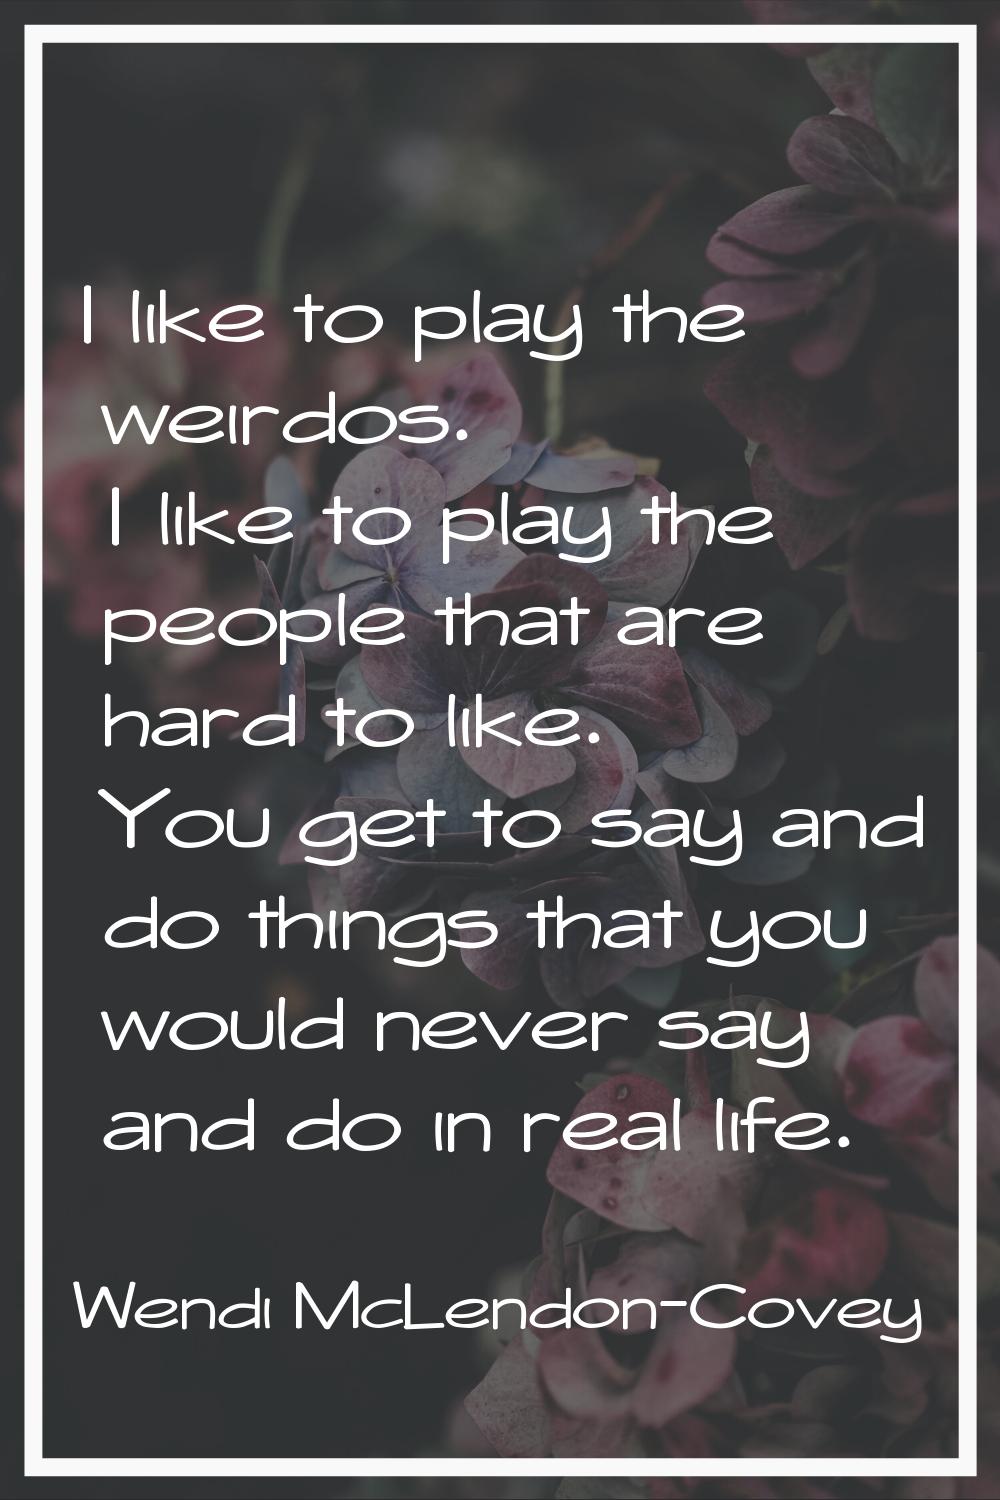 I like to play the weirdos. I like to play the people that are hard to like. You get to say and do 